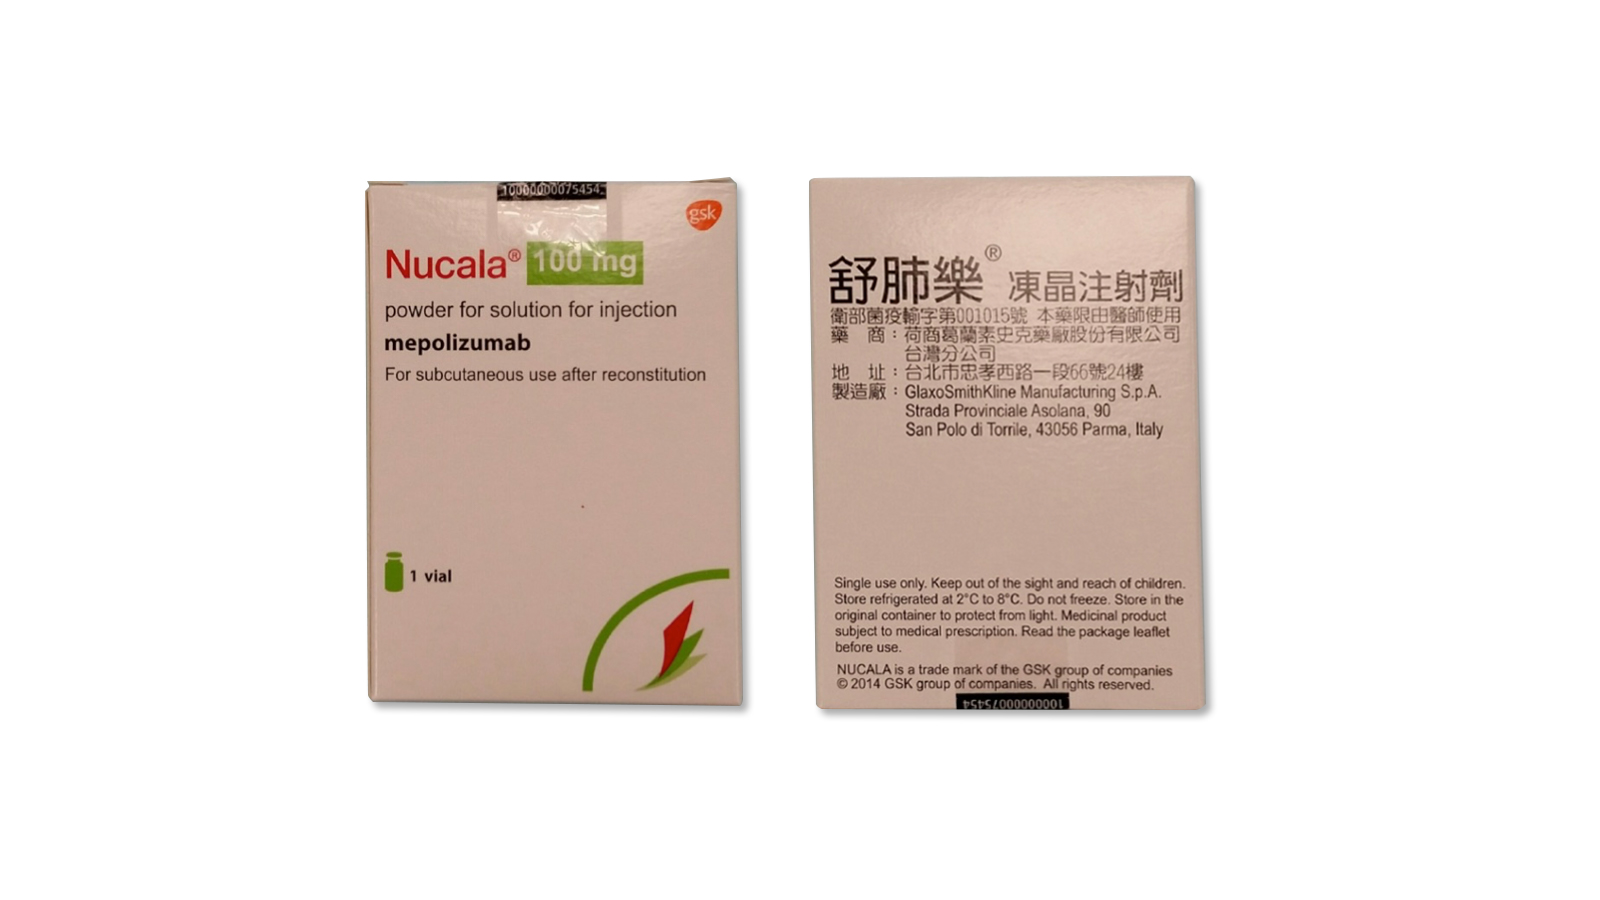 Nucala Powder For Solution For Injection 舒肺樂凍晶注射劑產品照片